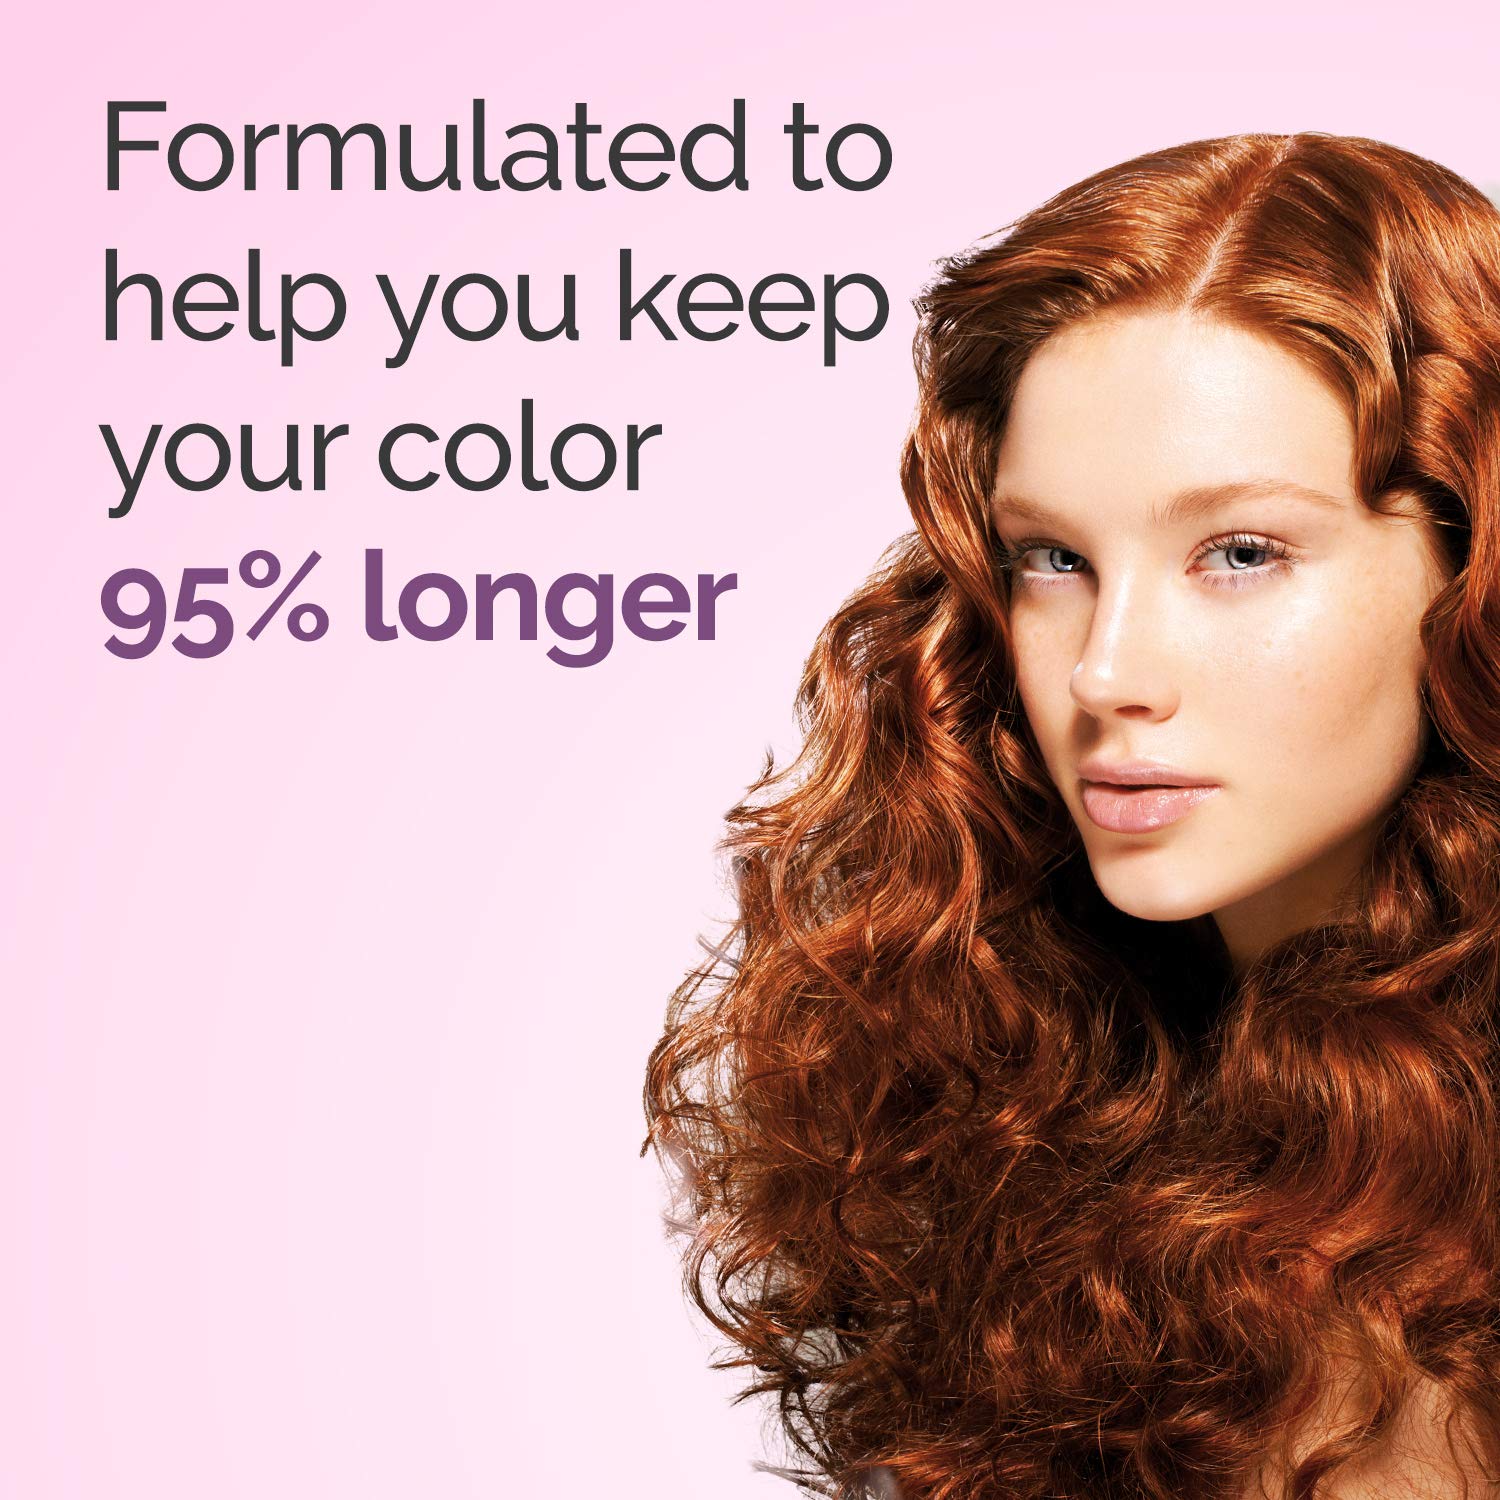 Framesi Color Lover Smooth Shine Conditioner, Sulfate Free Conditioner with Coconut Oil and Quinoa, Color Treated Hair